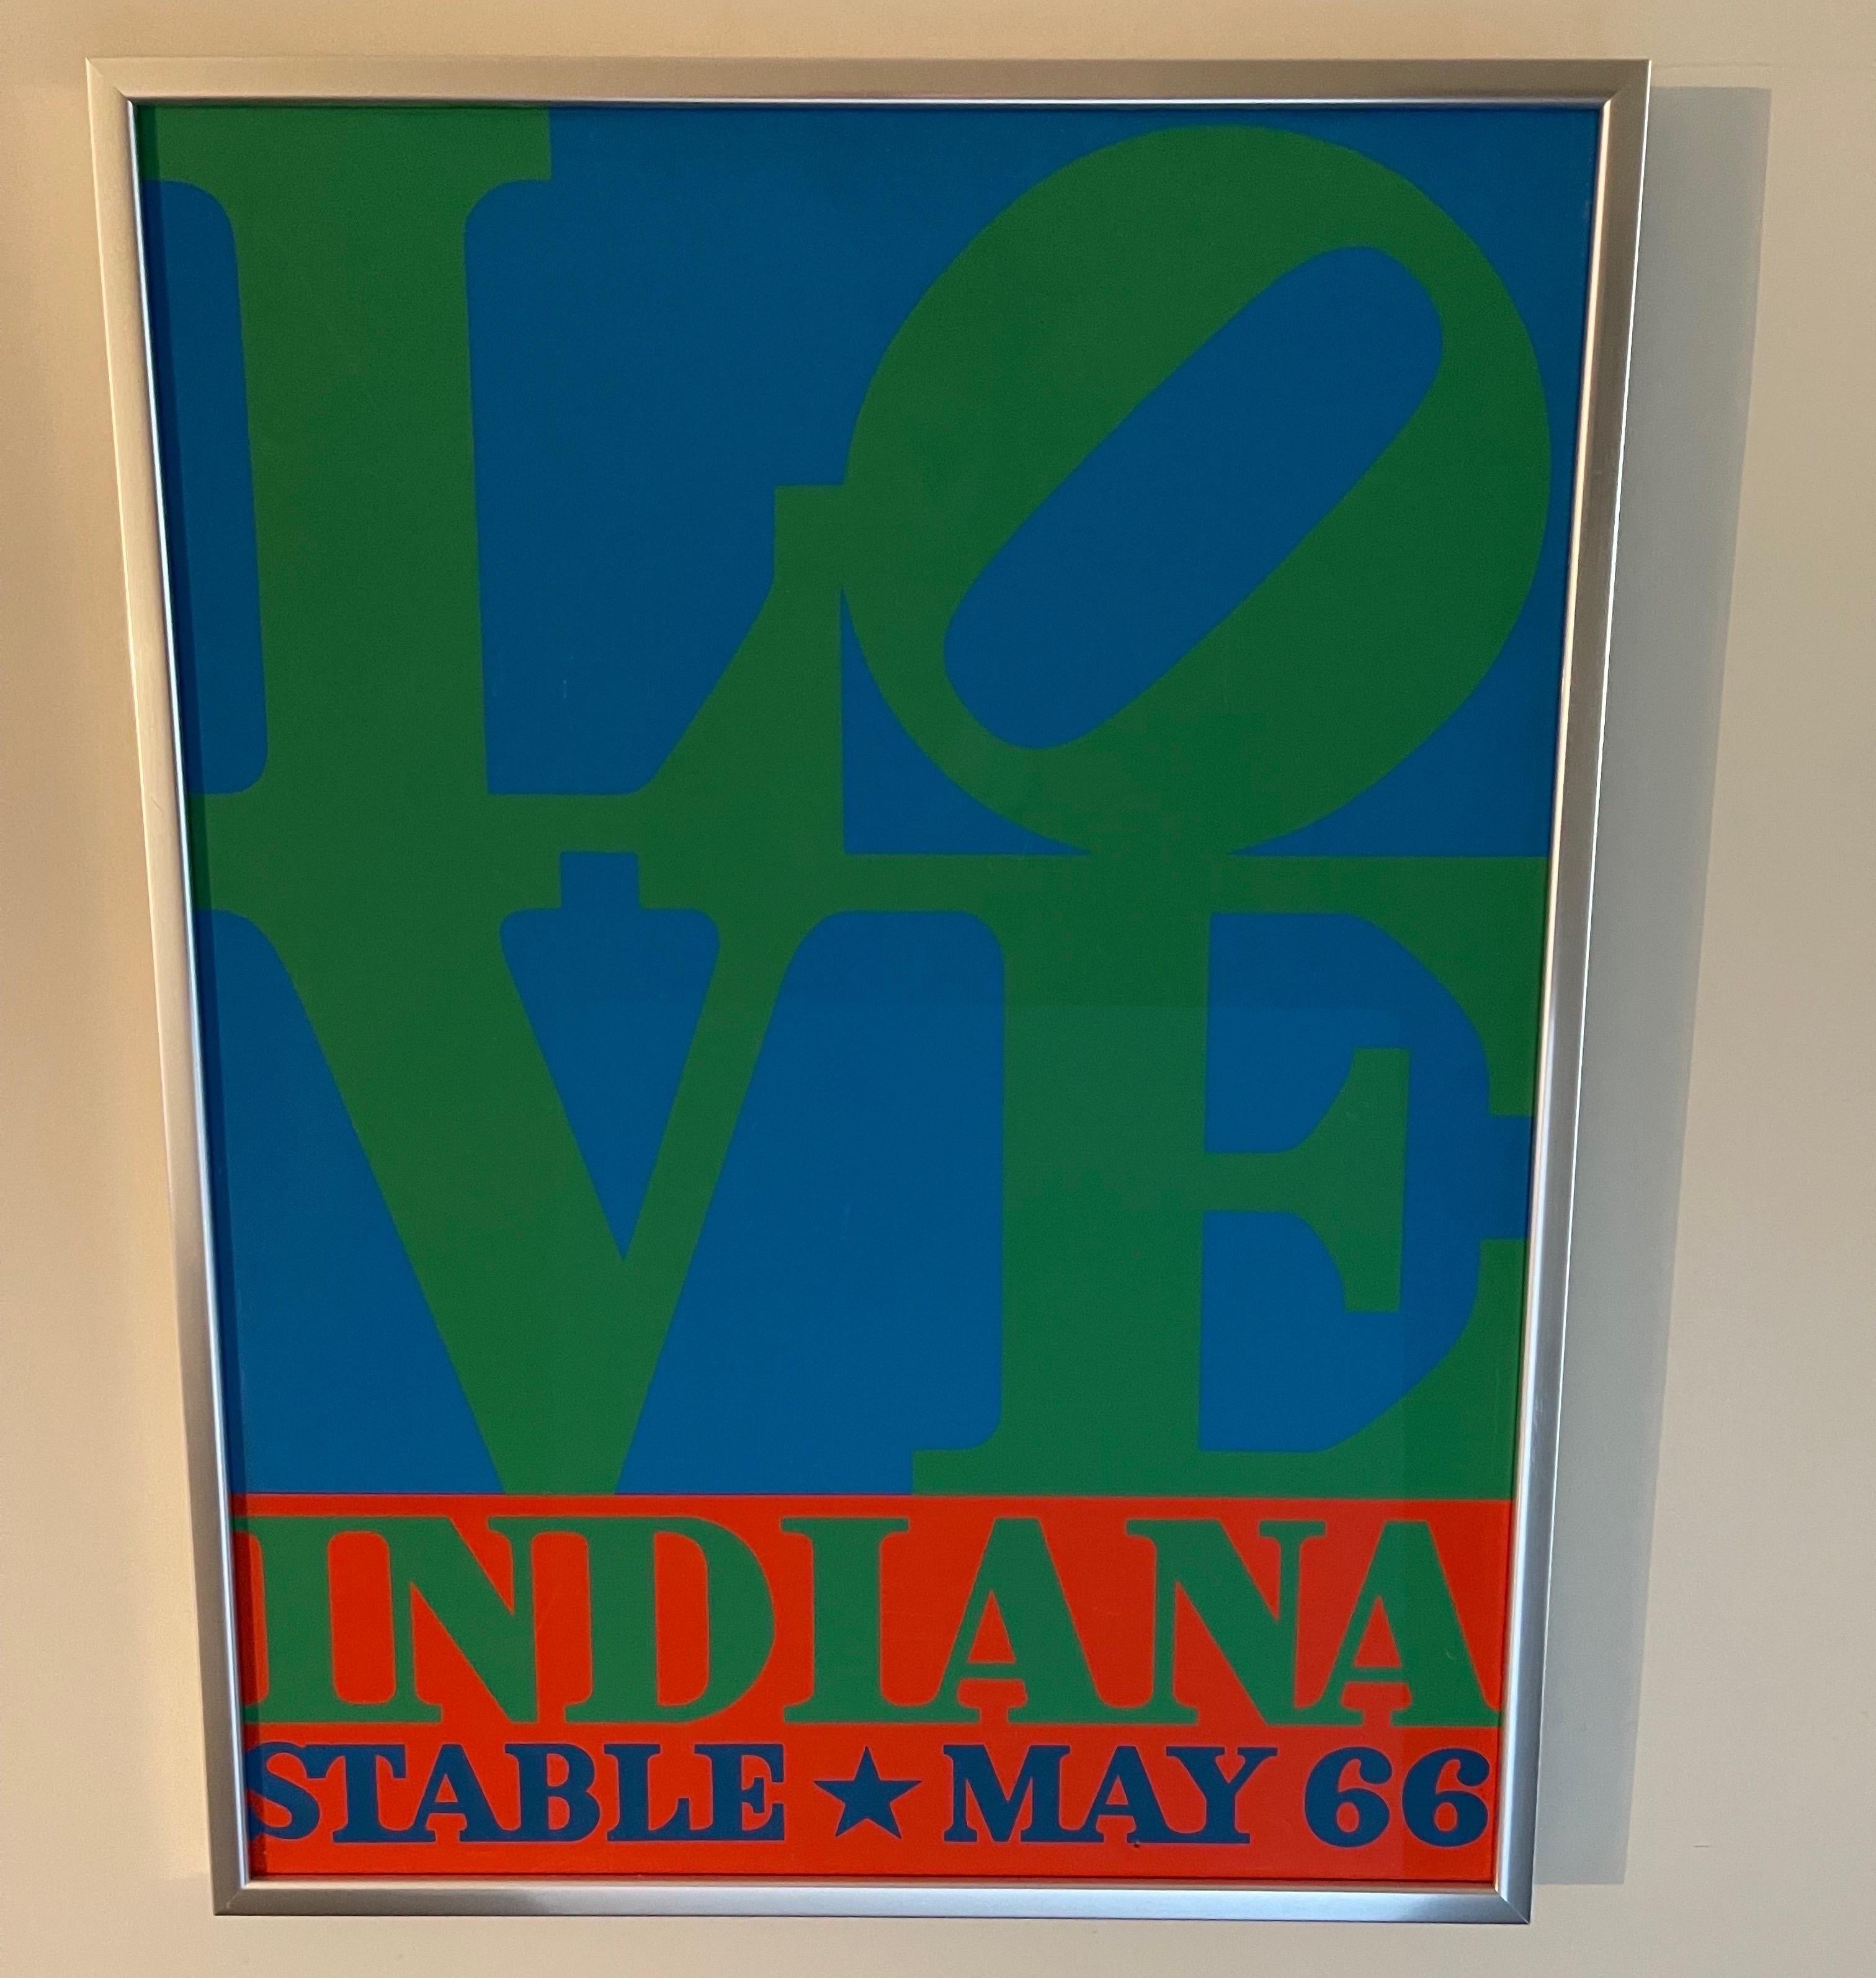 Robert Indiana LOVE 1971 serigraph poster. Silk-screen poster designed and created by Robert Indiana and published by Posters Originals. 
Newly framed in silver wooden frame. 
Frame measures: 25” wide x 33” tall